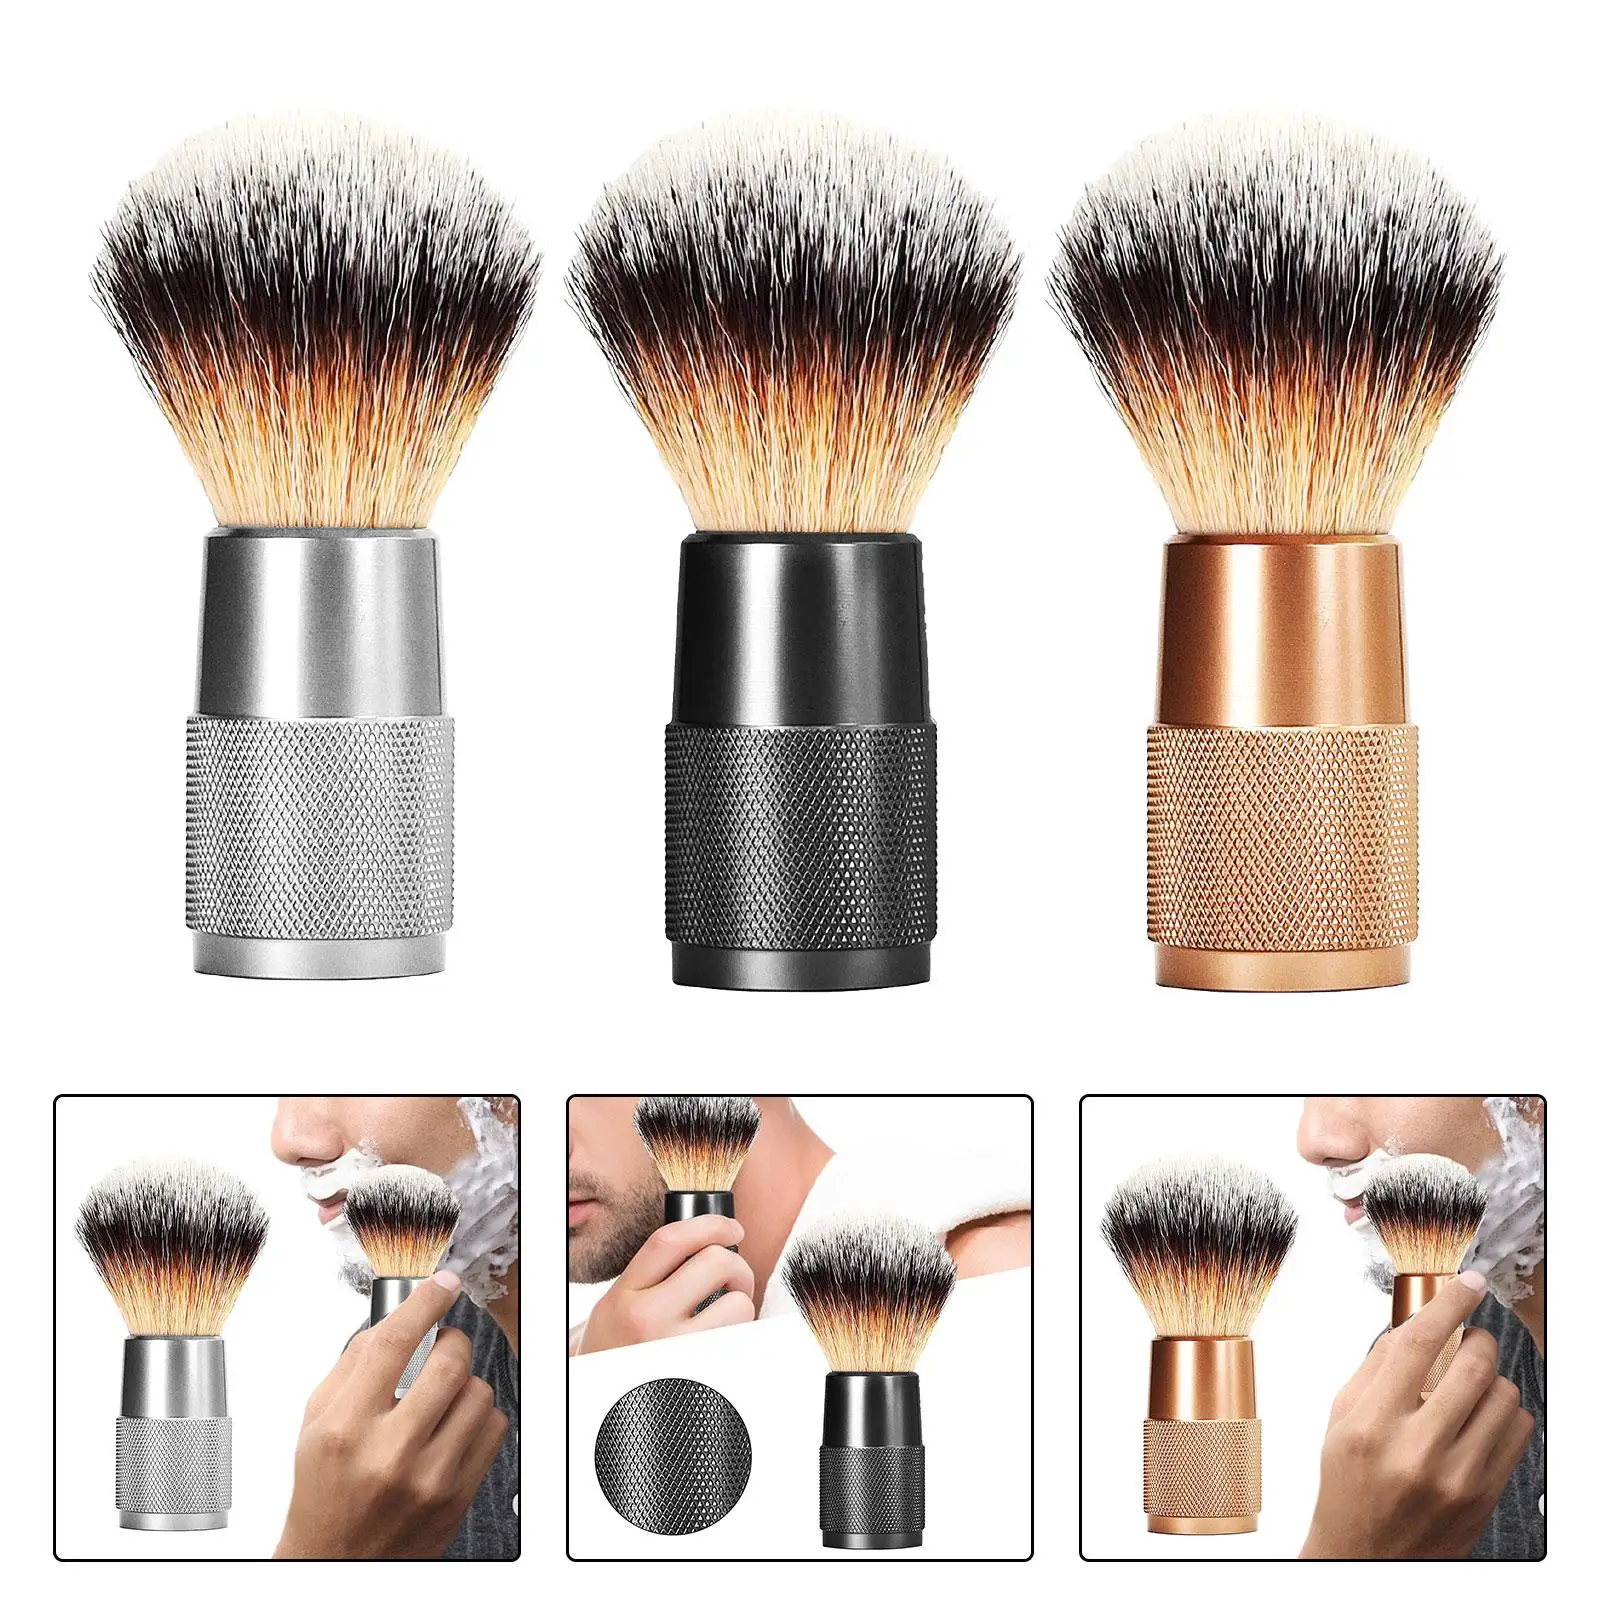 Shaving Brush Gift for Him Dad Father Men Boyfriend Hair Salon Tool Accessories Professional Easy Foaming Lightweight Soap Brush